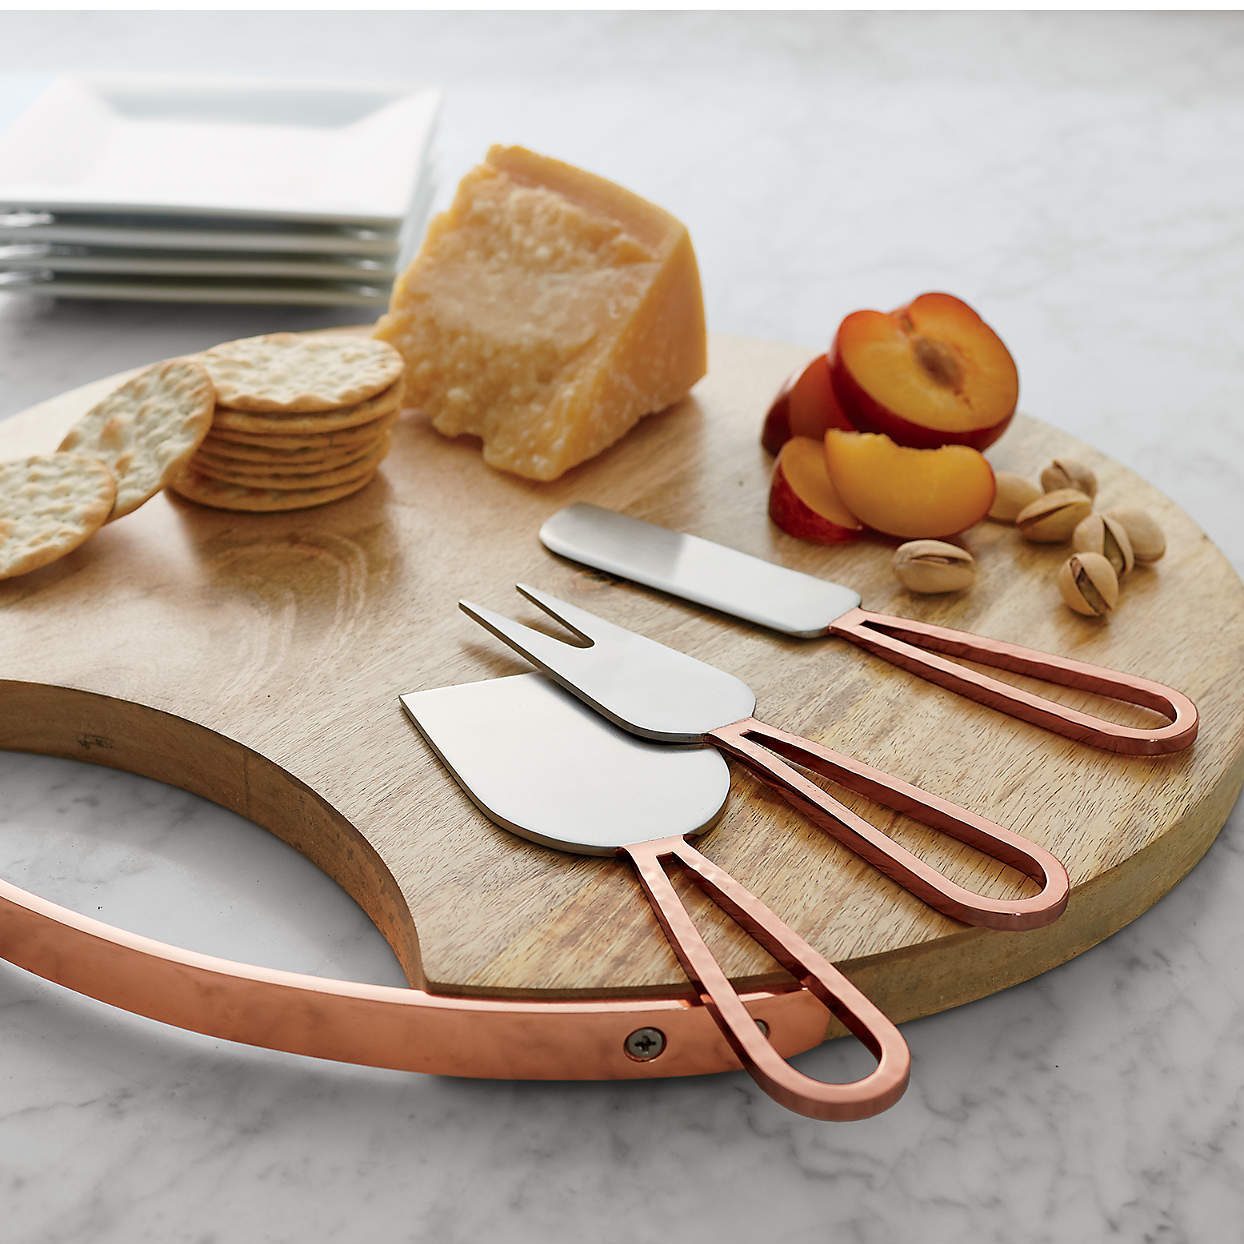 https://www.tasteofhome.com/wp-content/uploads/2021/11/cheese-knife-feature-e1635968490278.jpg